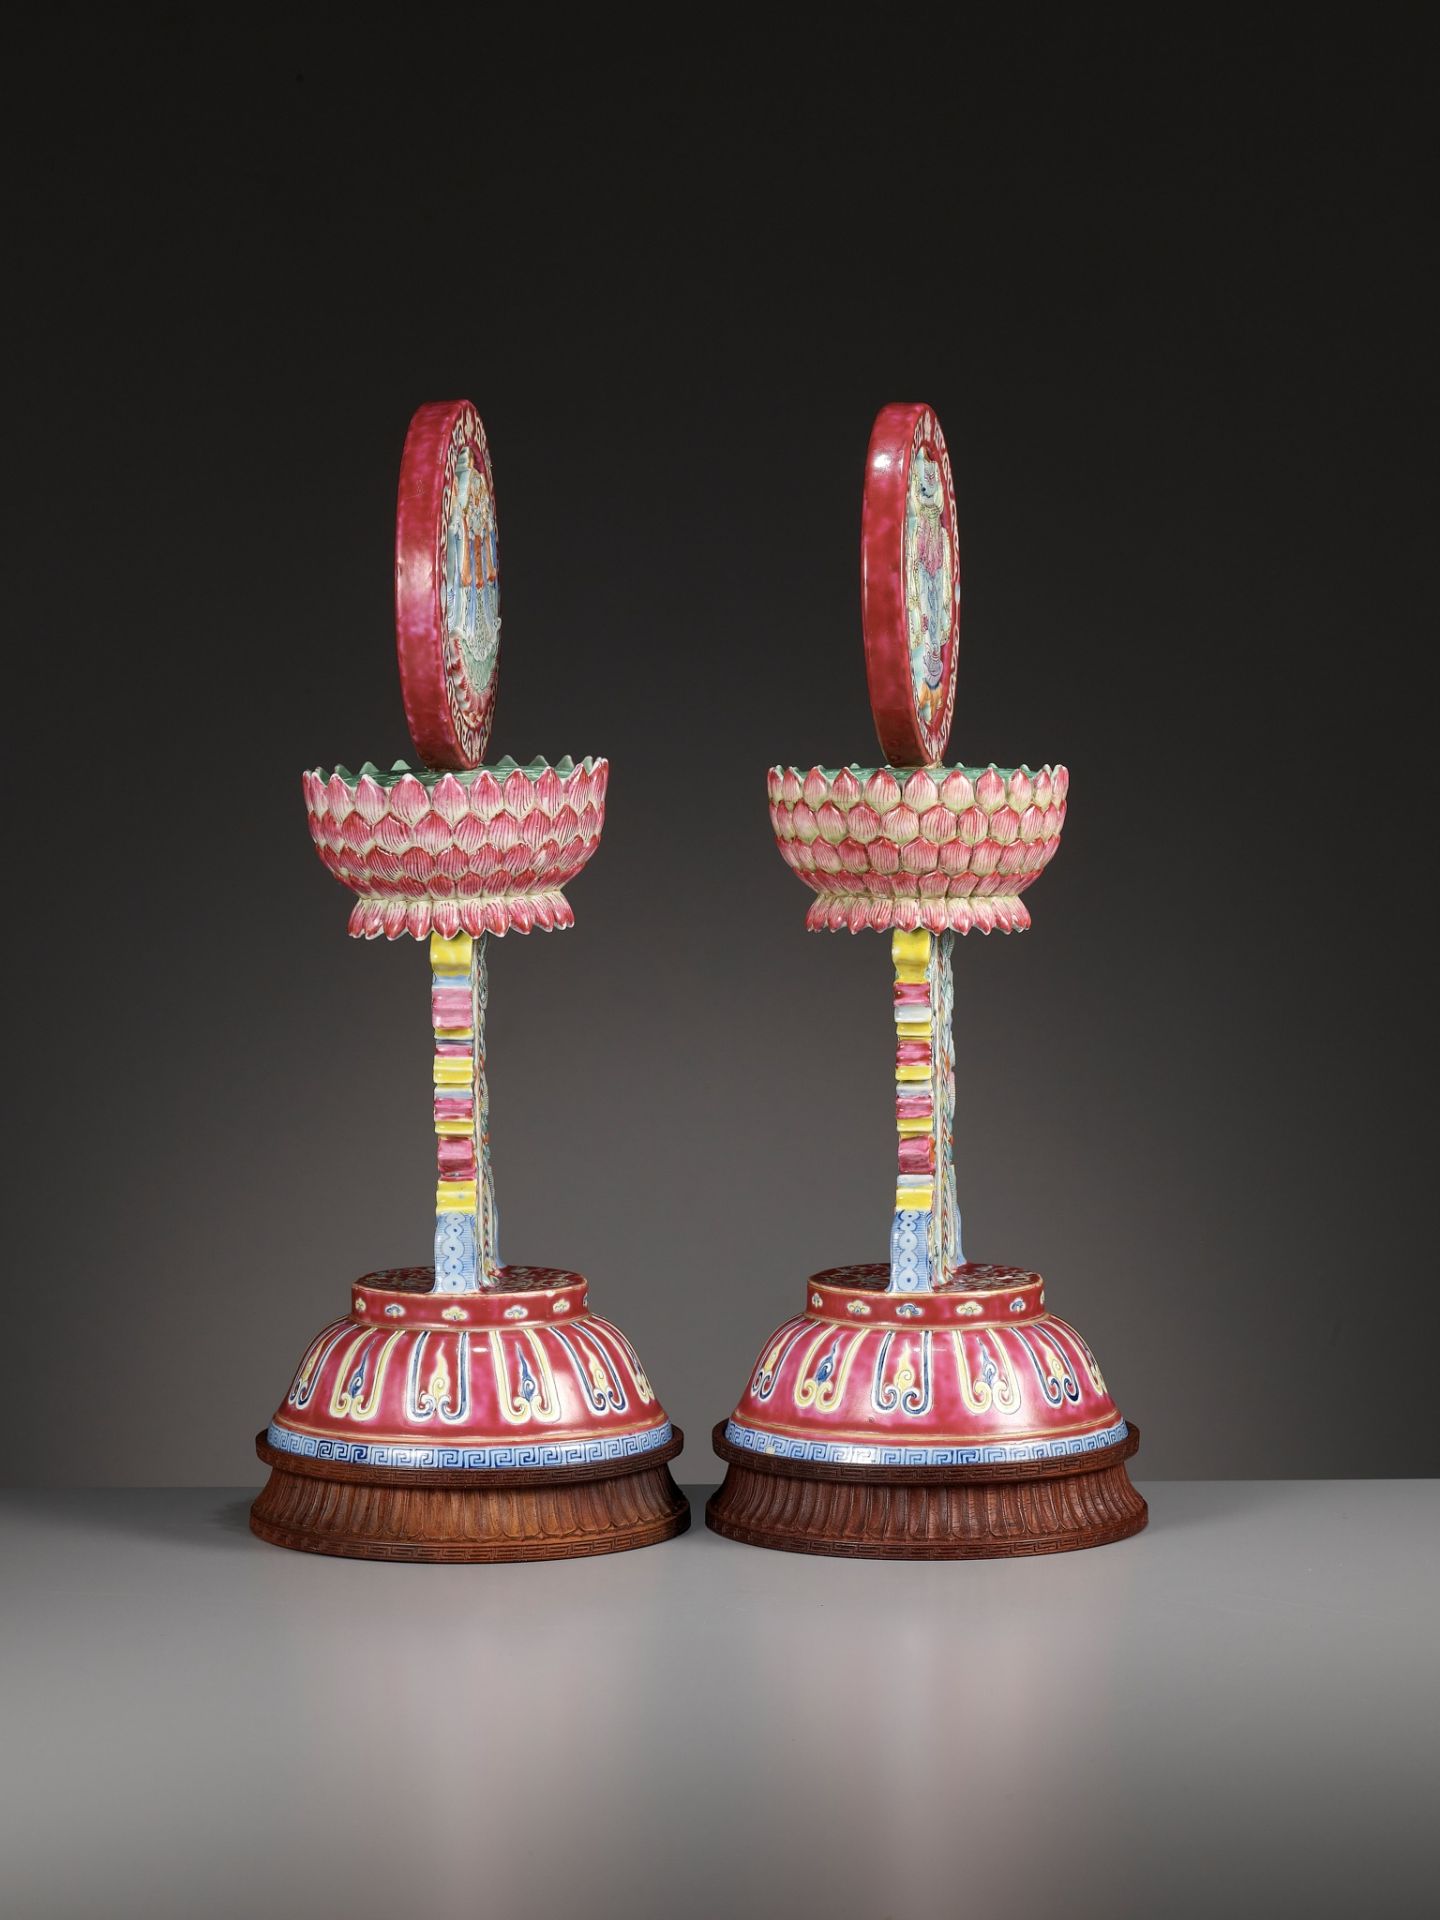 A PAIR OF LARGE RUBY-GROUND FAMILLE ROSE BUDDHIST EMBLEM ALTAR ORNAMENTS, QING DYNASTY - Image 12 of 17